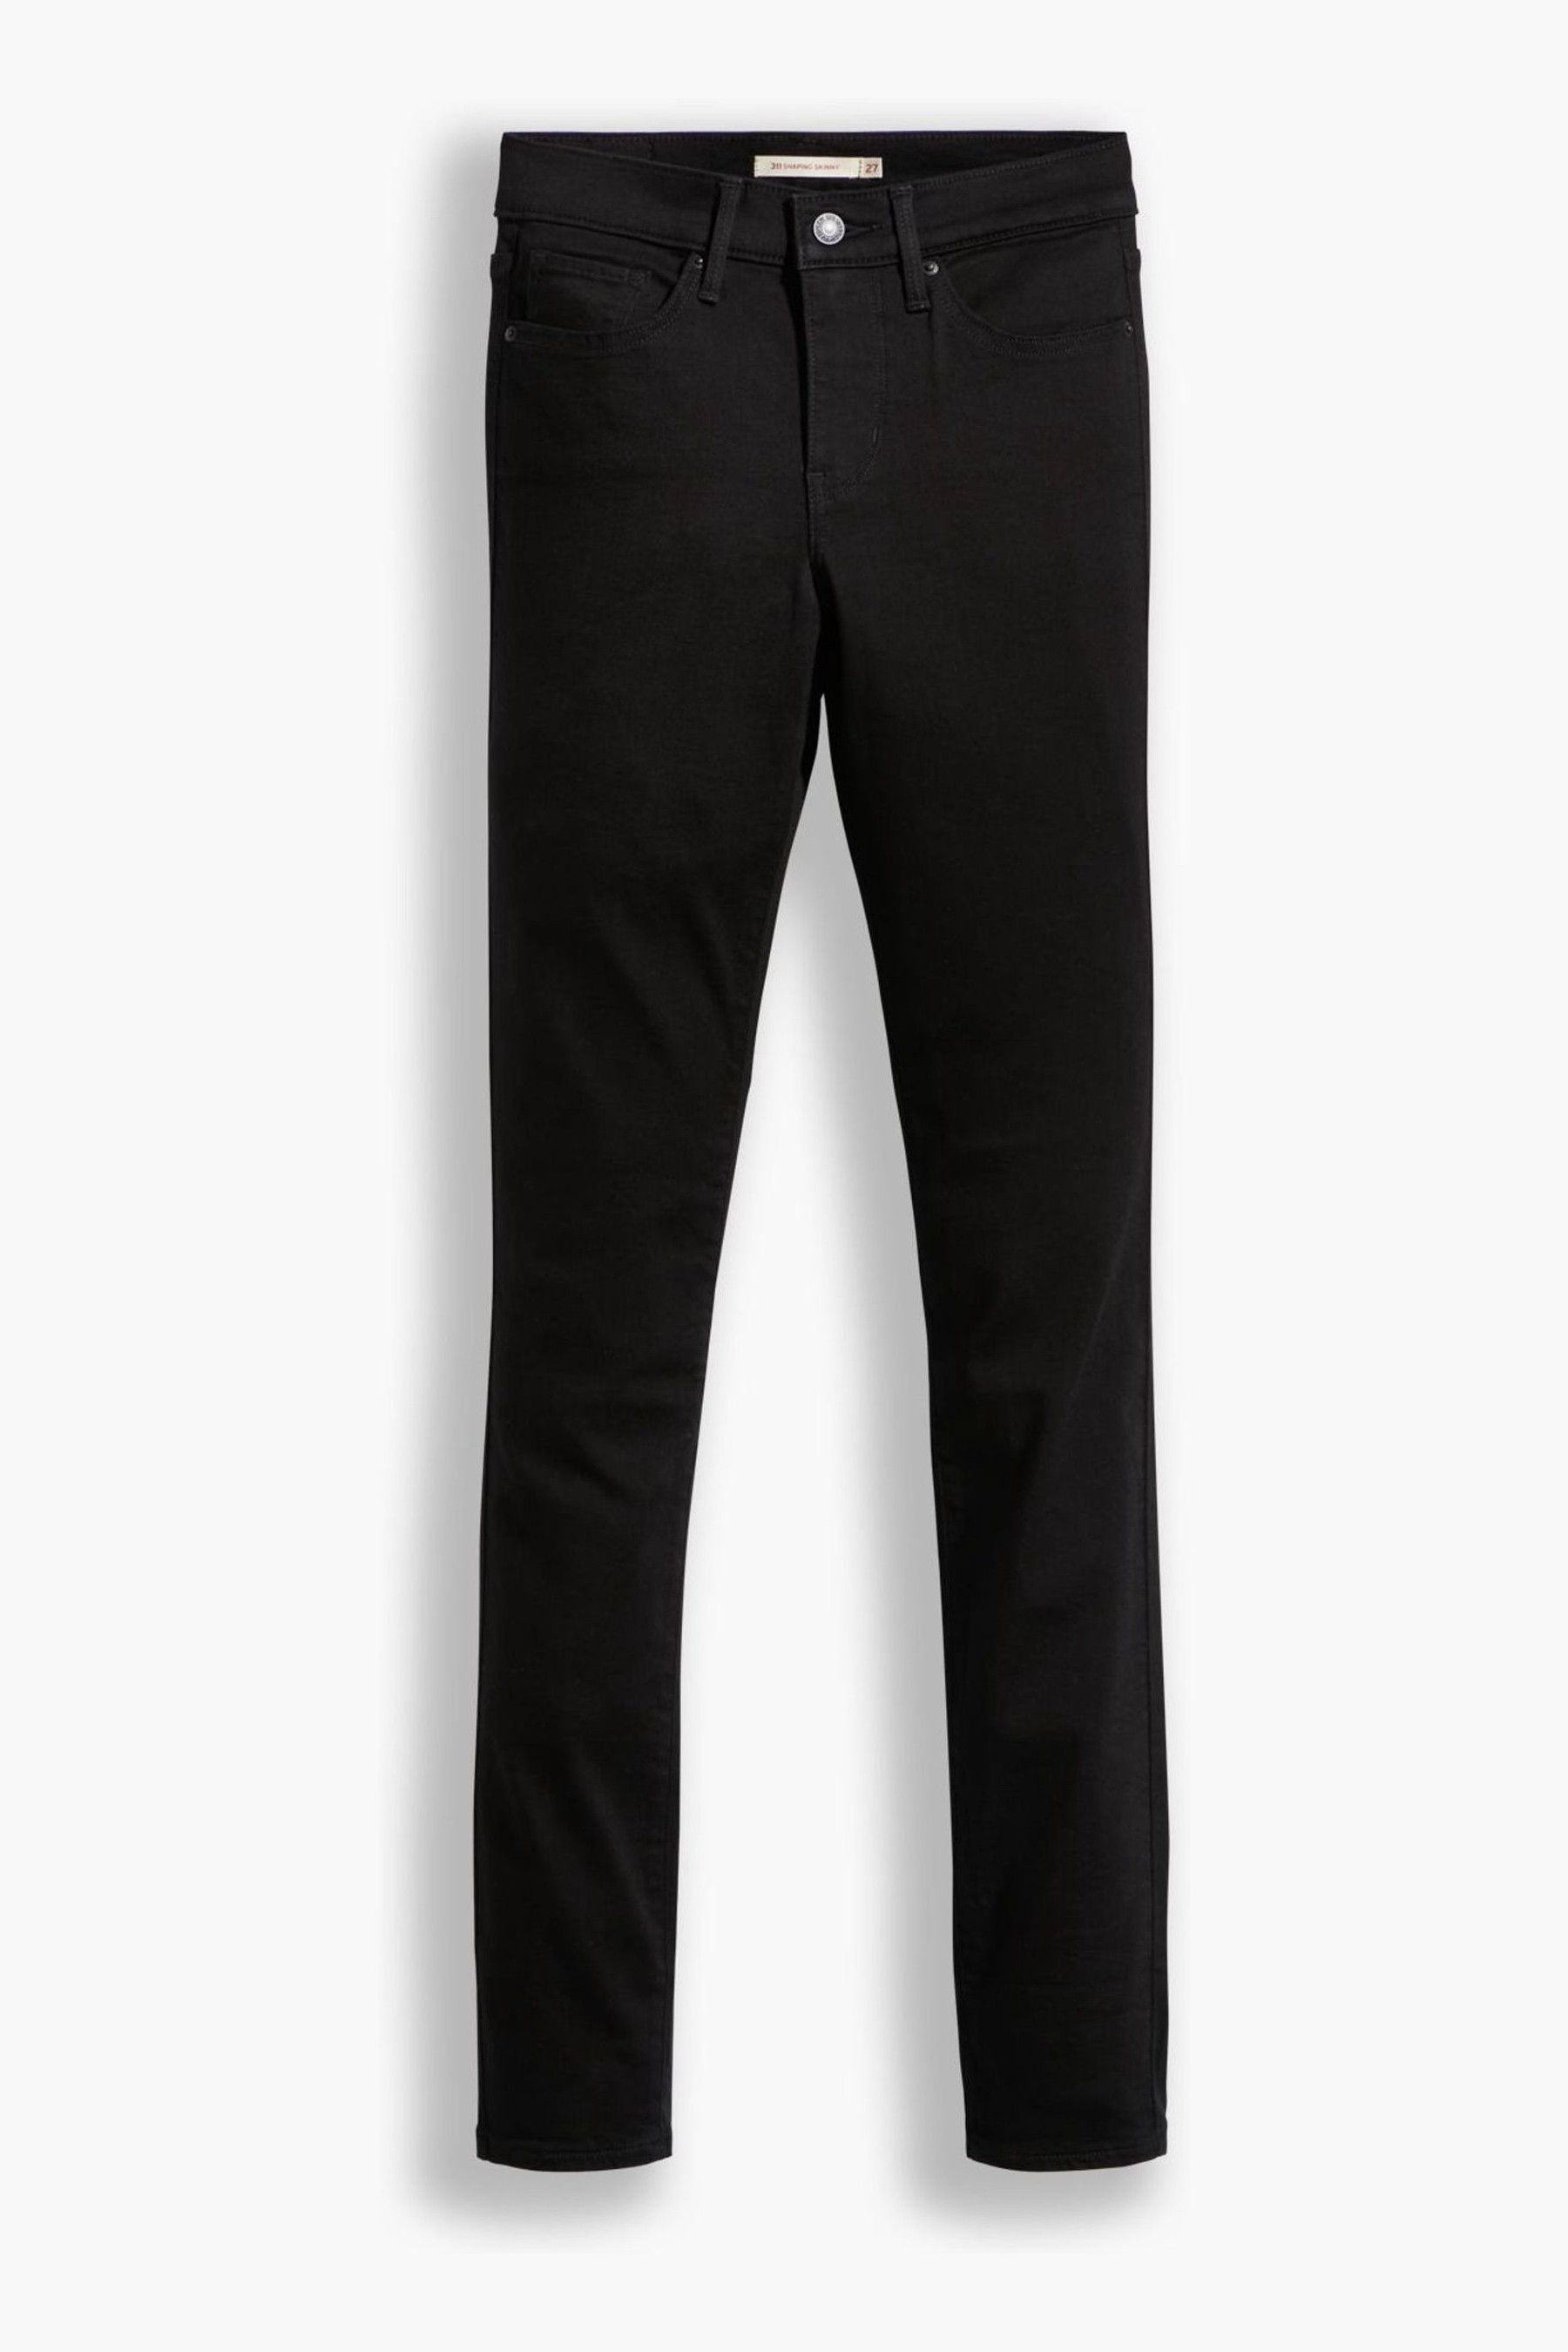 Buy Levi's® Soft Black 311™ Shaping Skinny Jeans from the Next UK ...